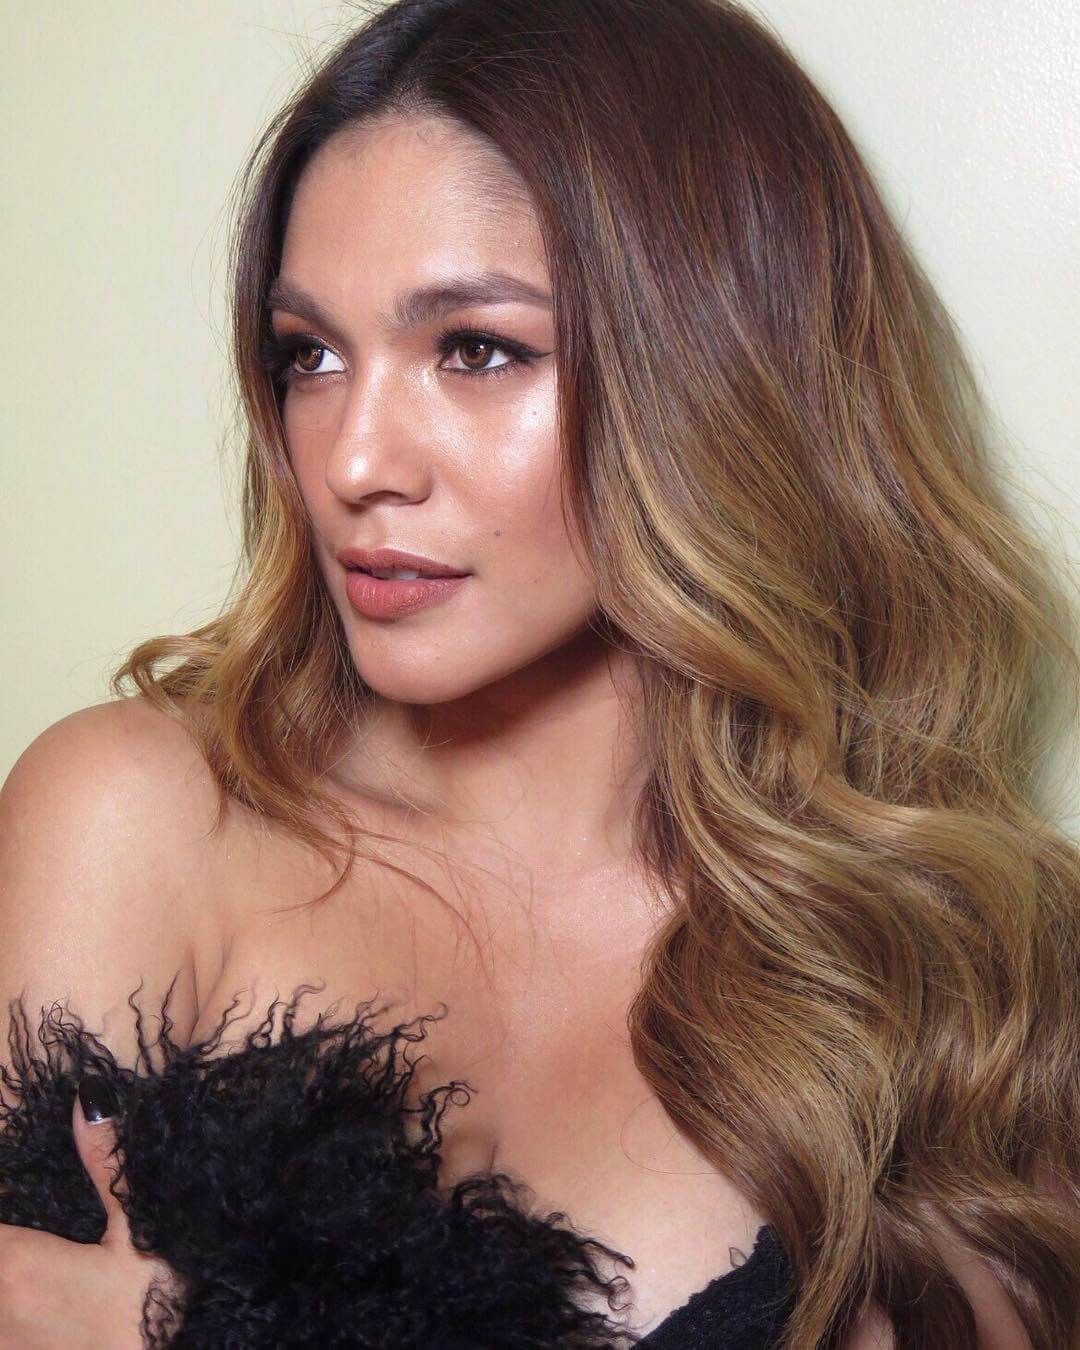 The Hottest Photos Of Andrea Torres Will Make Your Day Better - 12thBlog